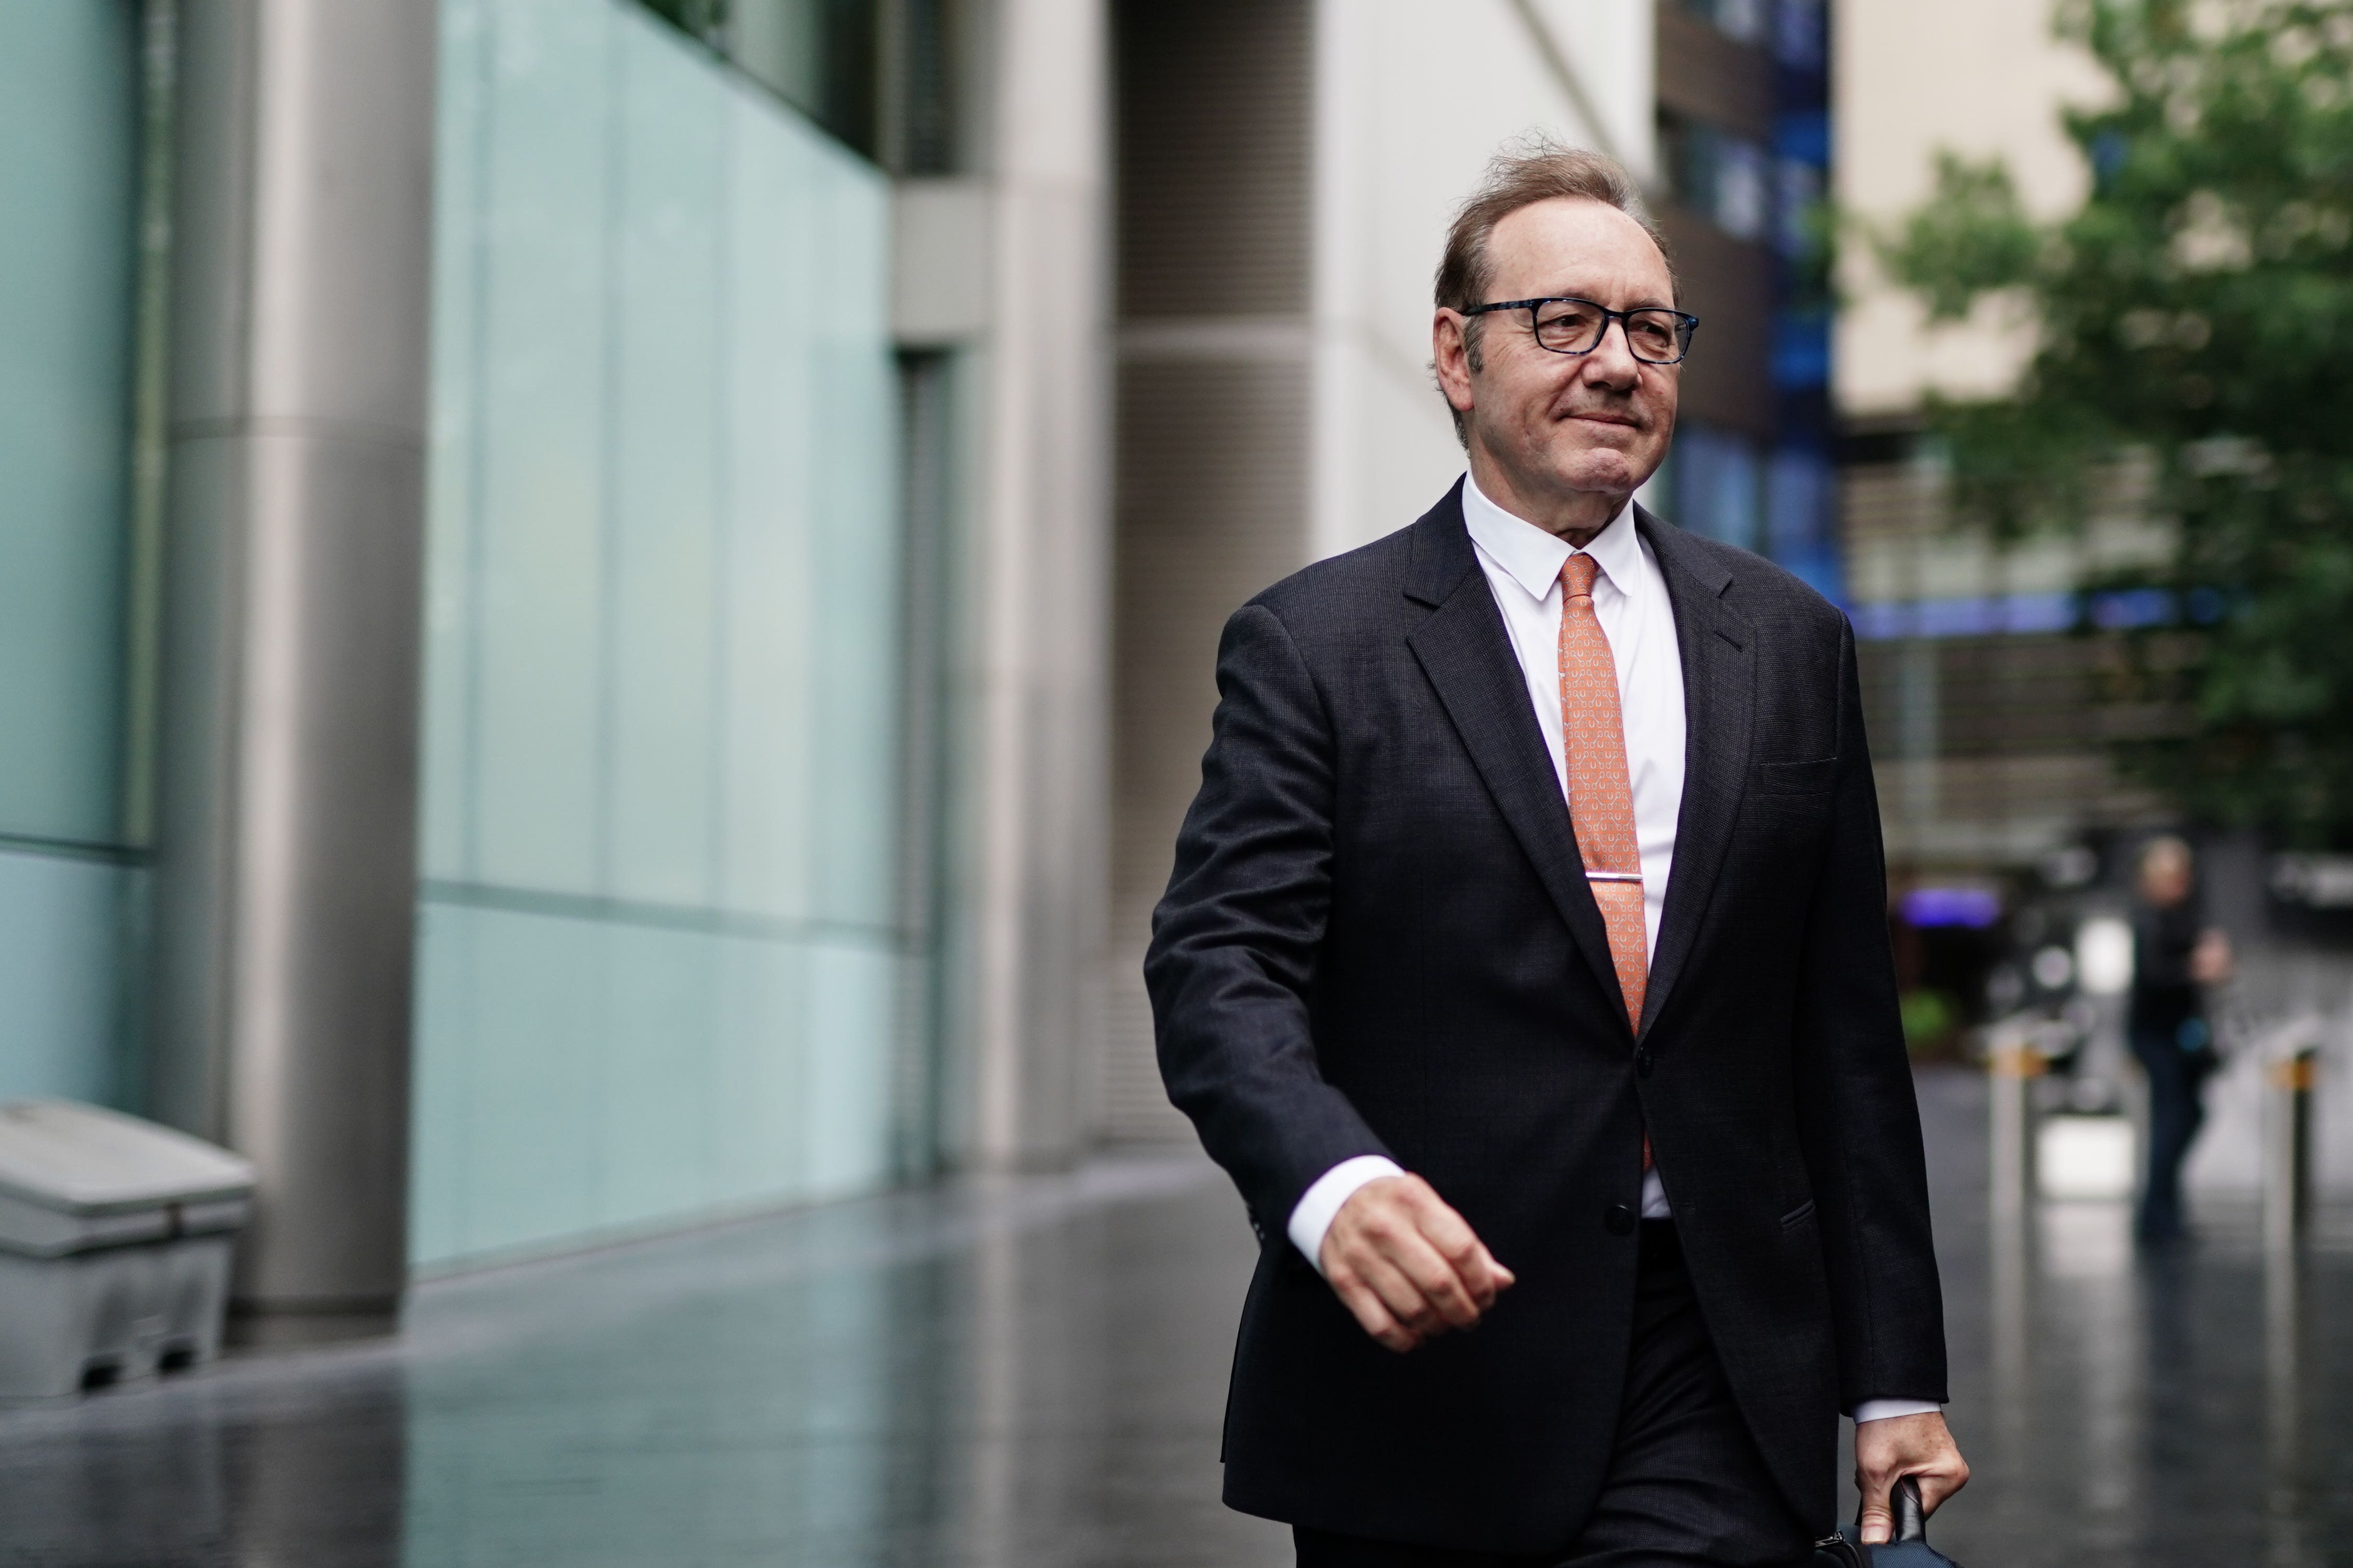 Spacey was found not guilty of all charges